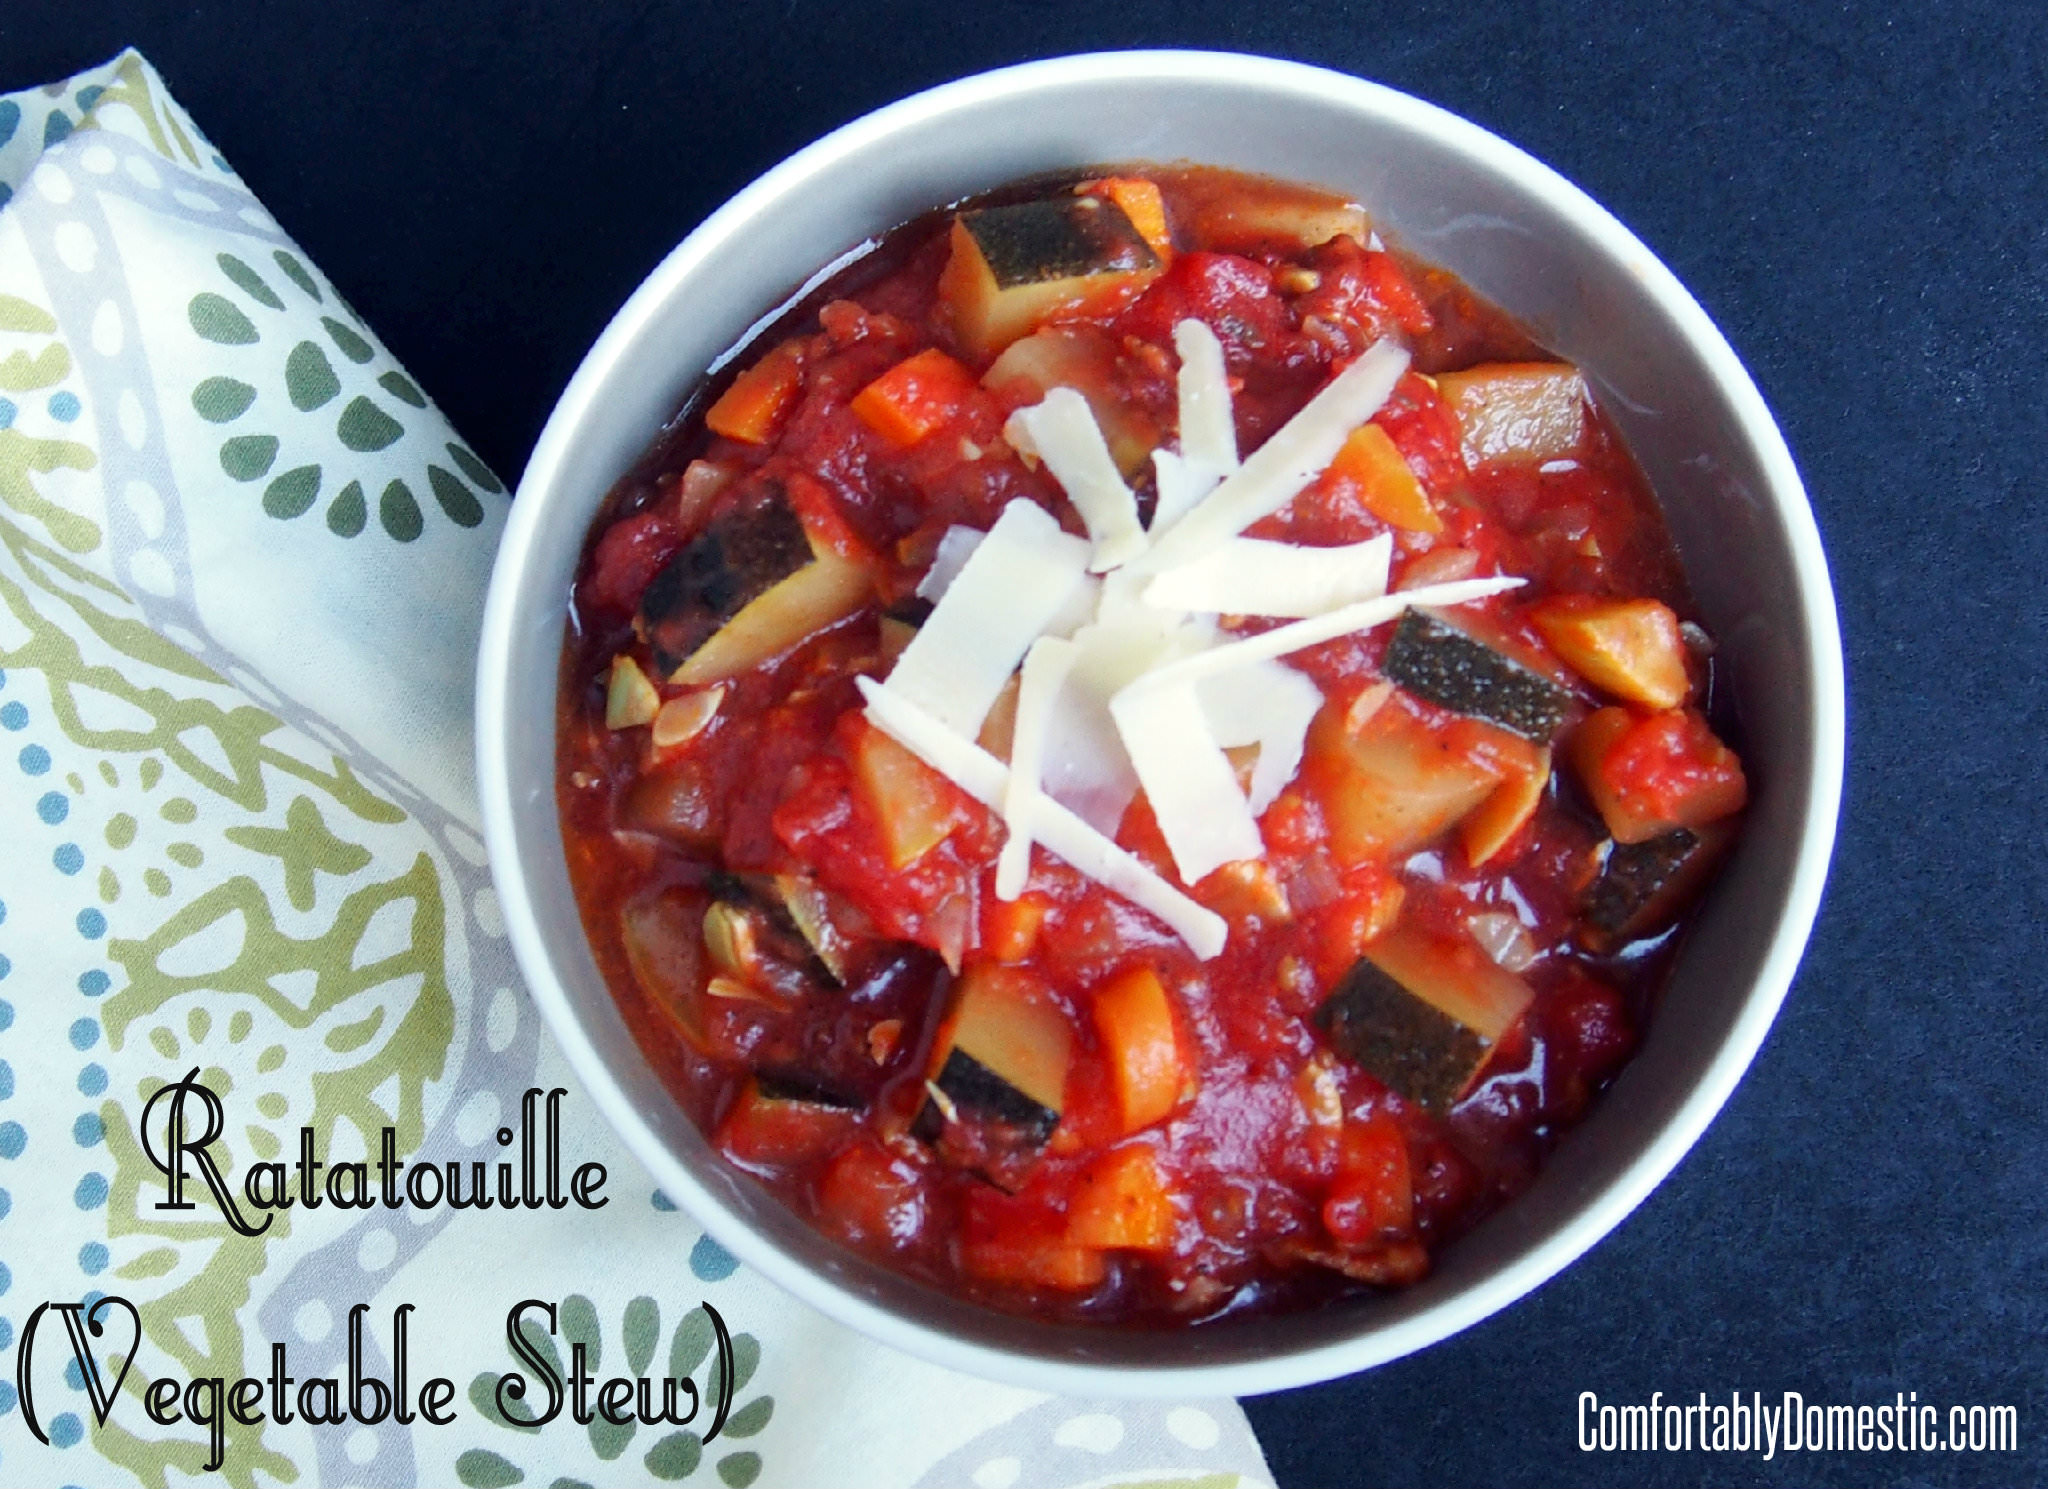 Homemade Ratatouille is a hearty, fresh vegetable stew, meant to nourish your body and warm your soul. | ComfortablyDomestic.com